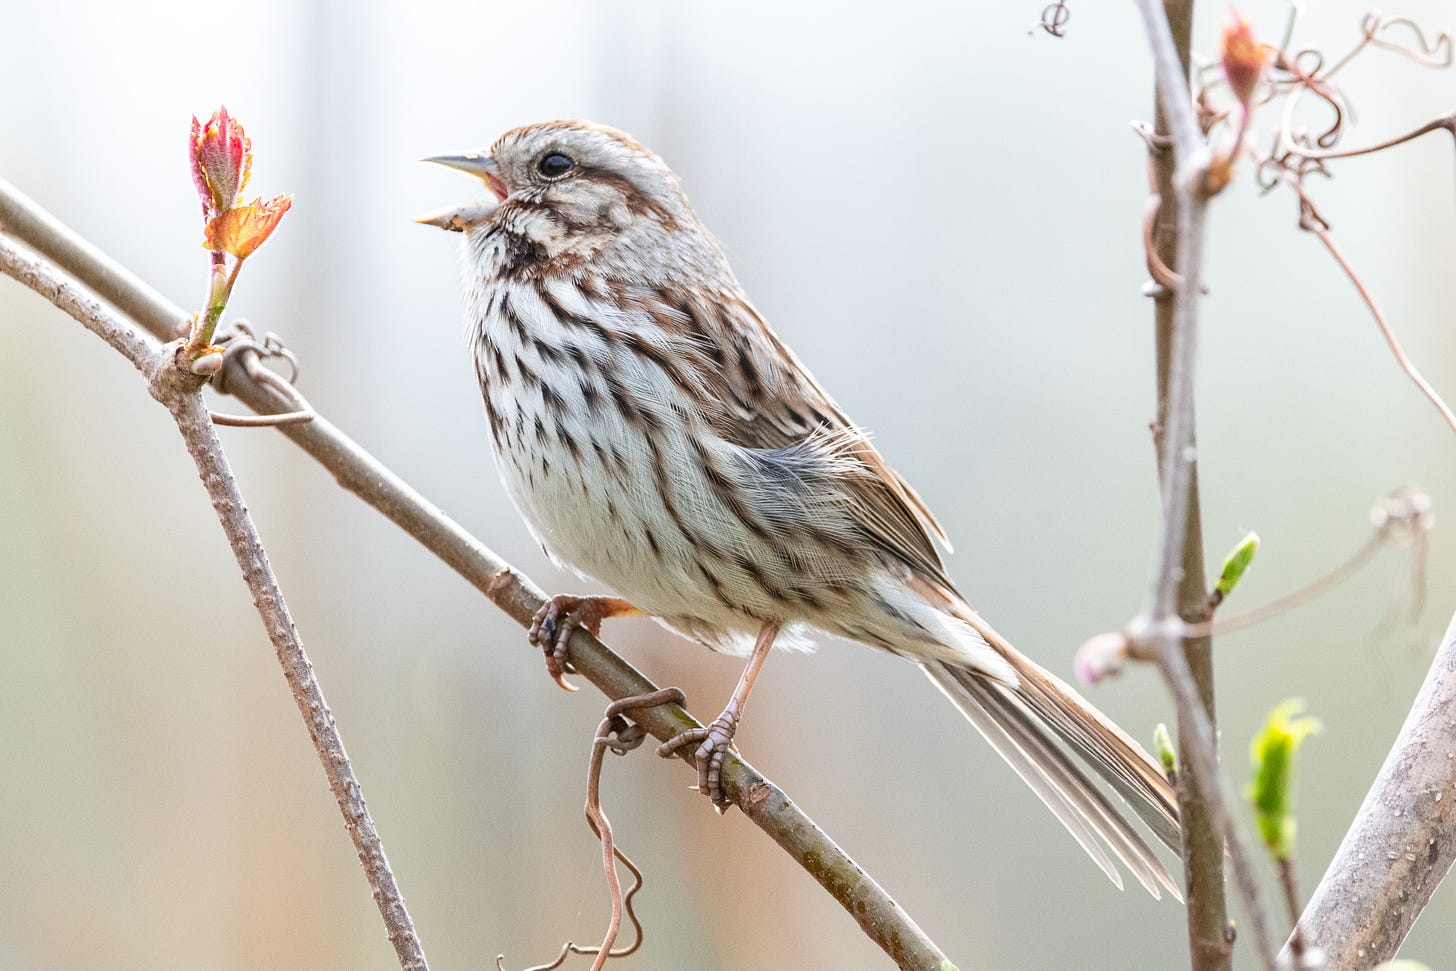 A brown-and-white-streaked bird, beak wide open in song, is perched in a budding tree